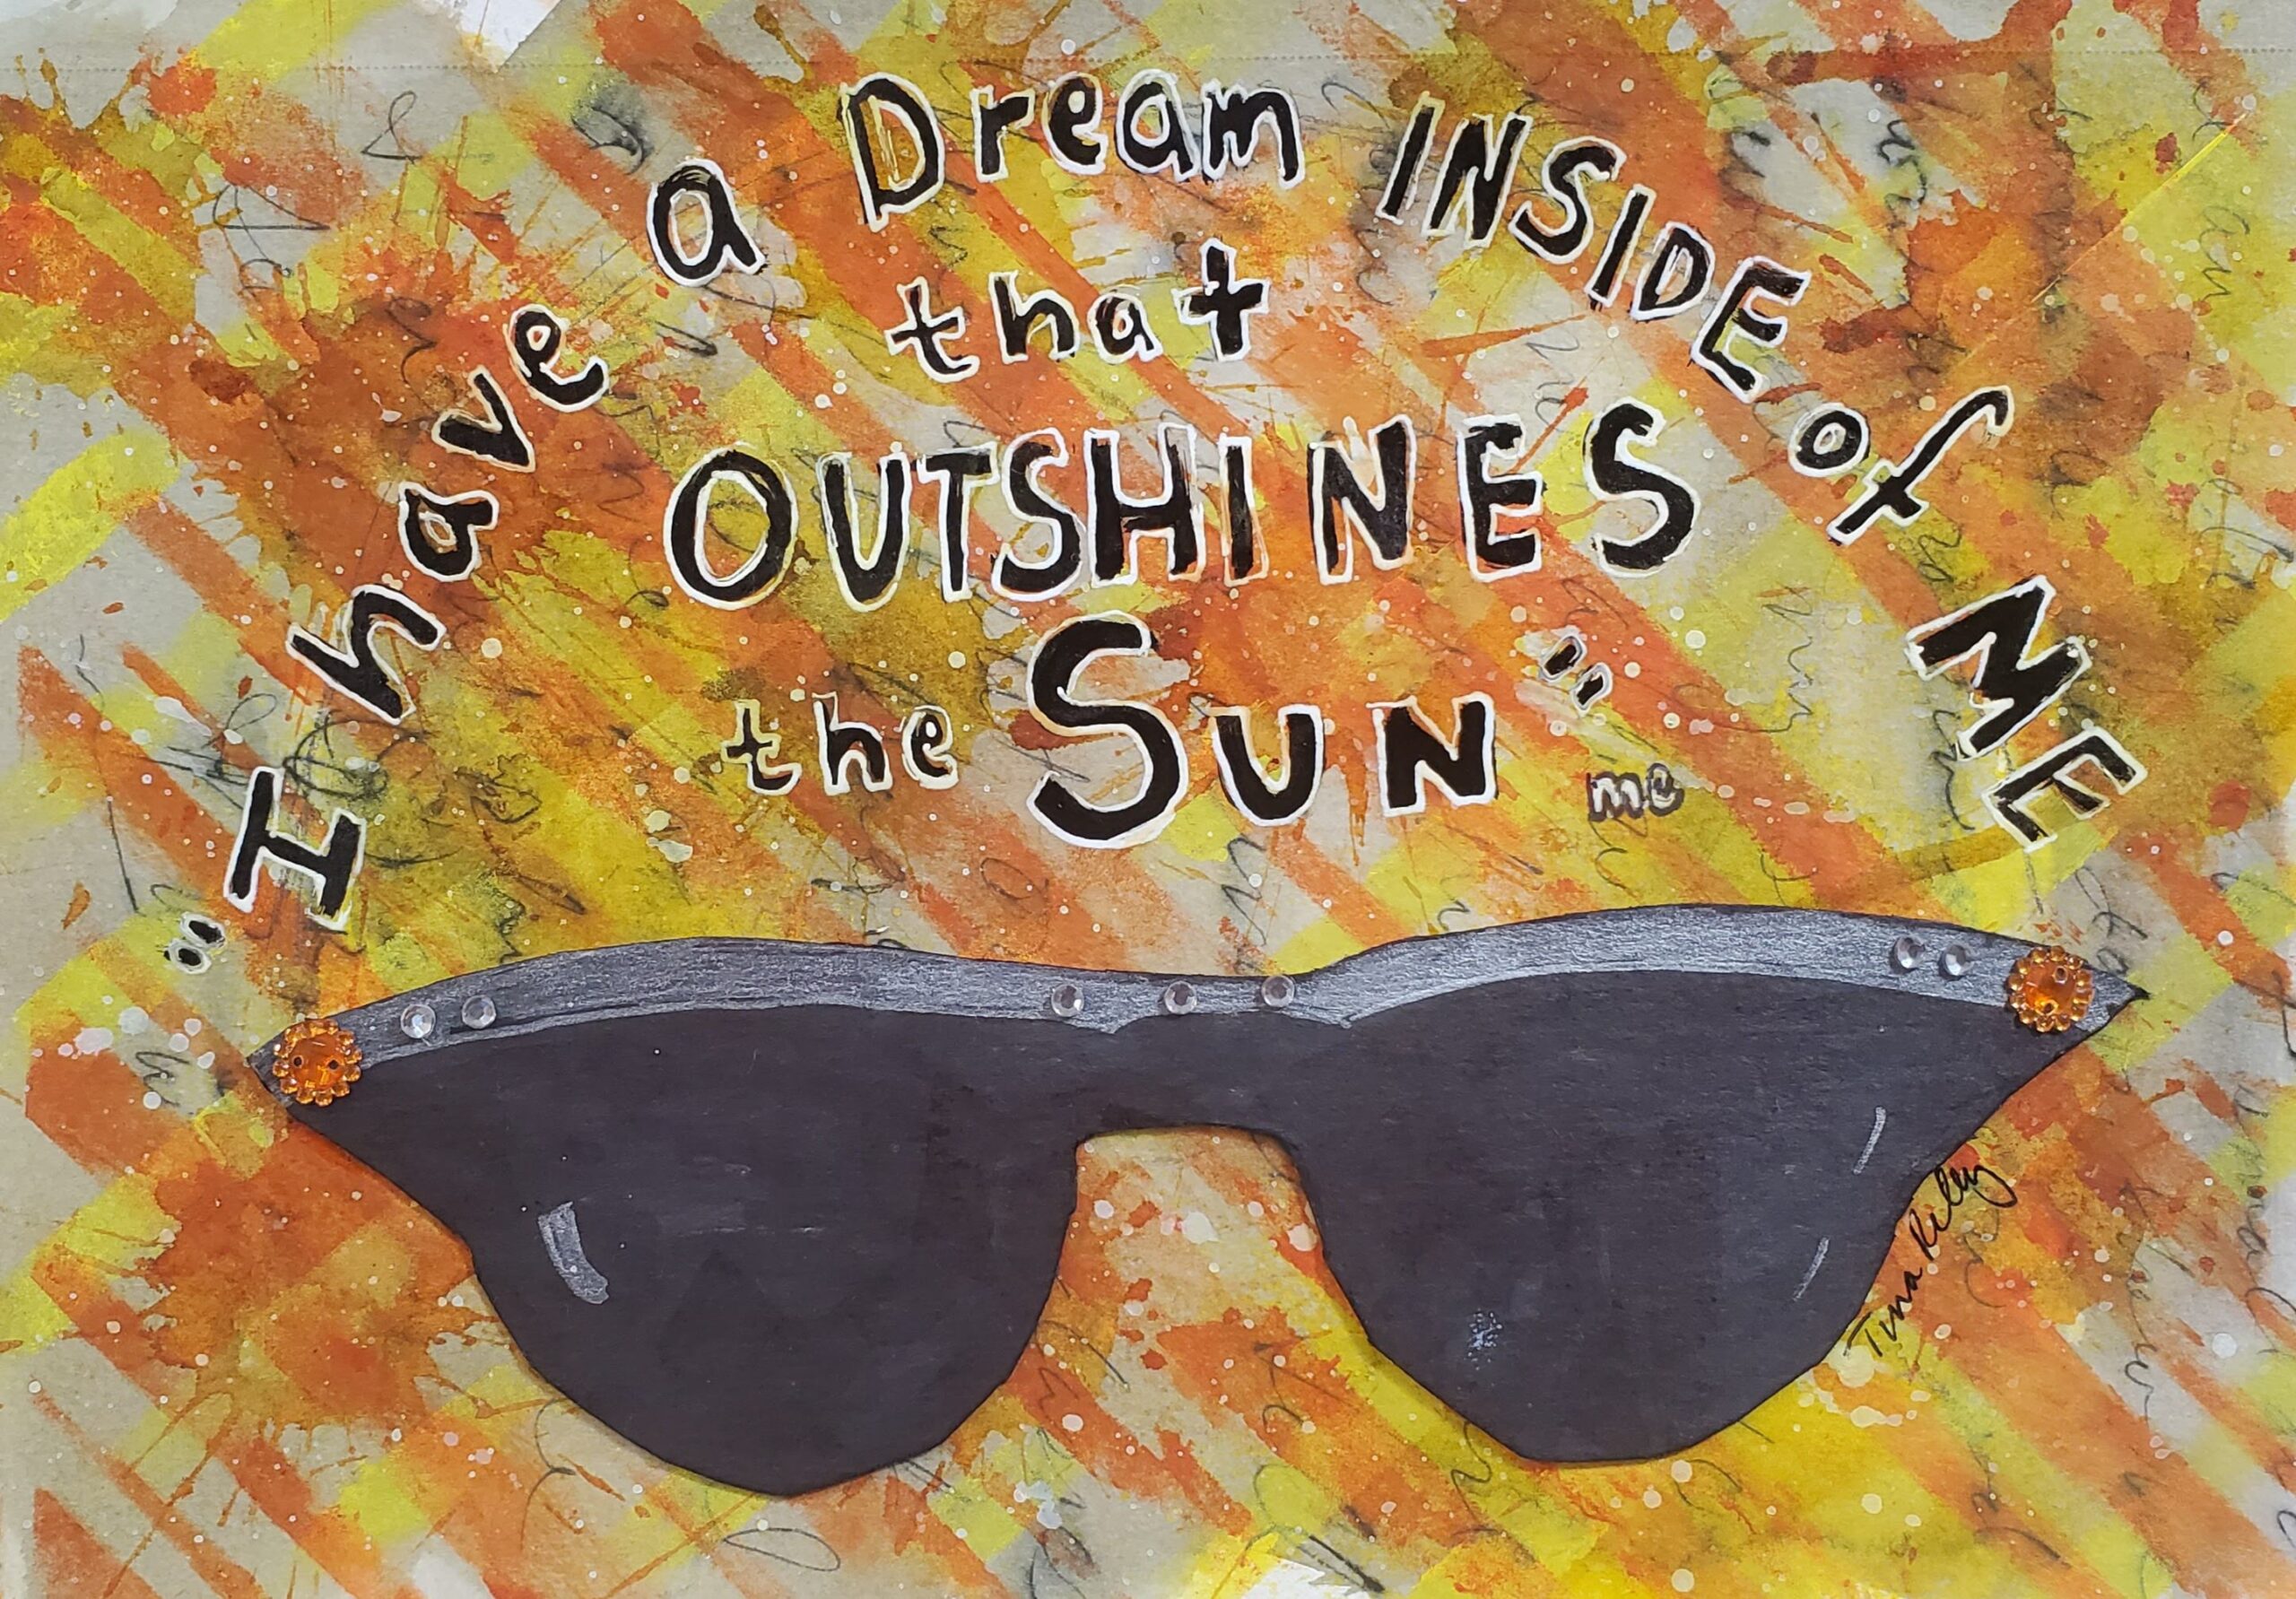 Dark sunglasses with jeweled frames. Orange and yellow painted background. Words:" I have a dream inside of me that outshines the sun"